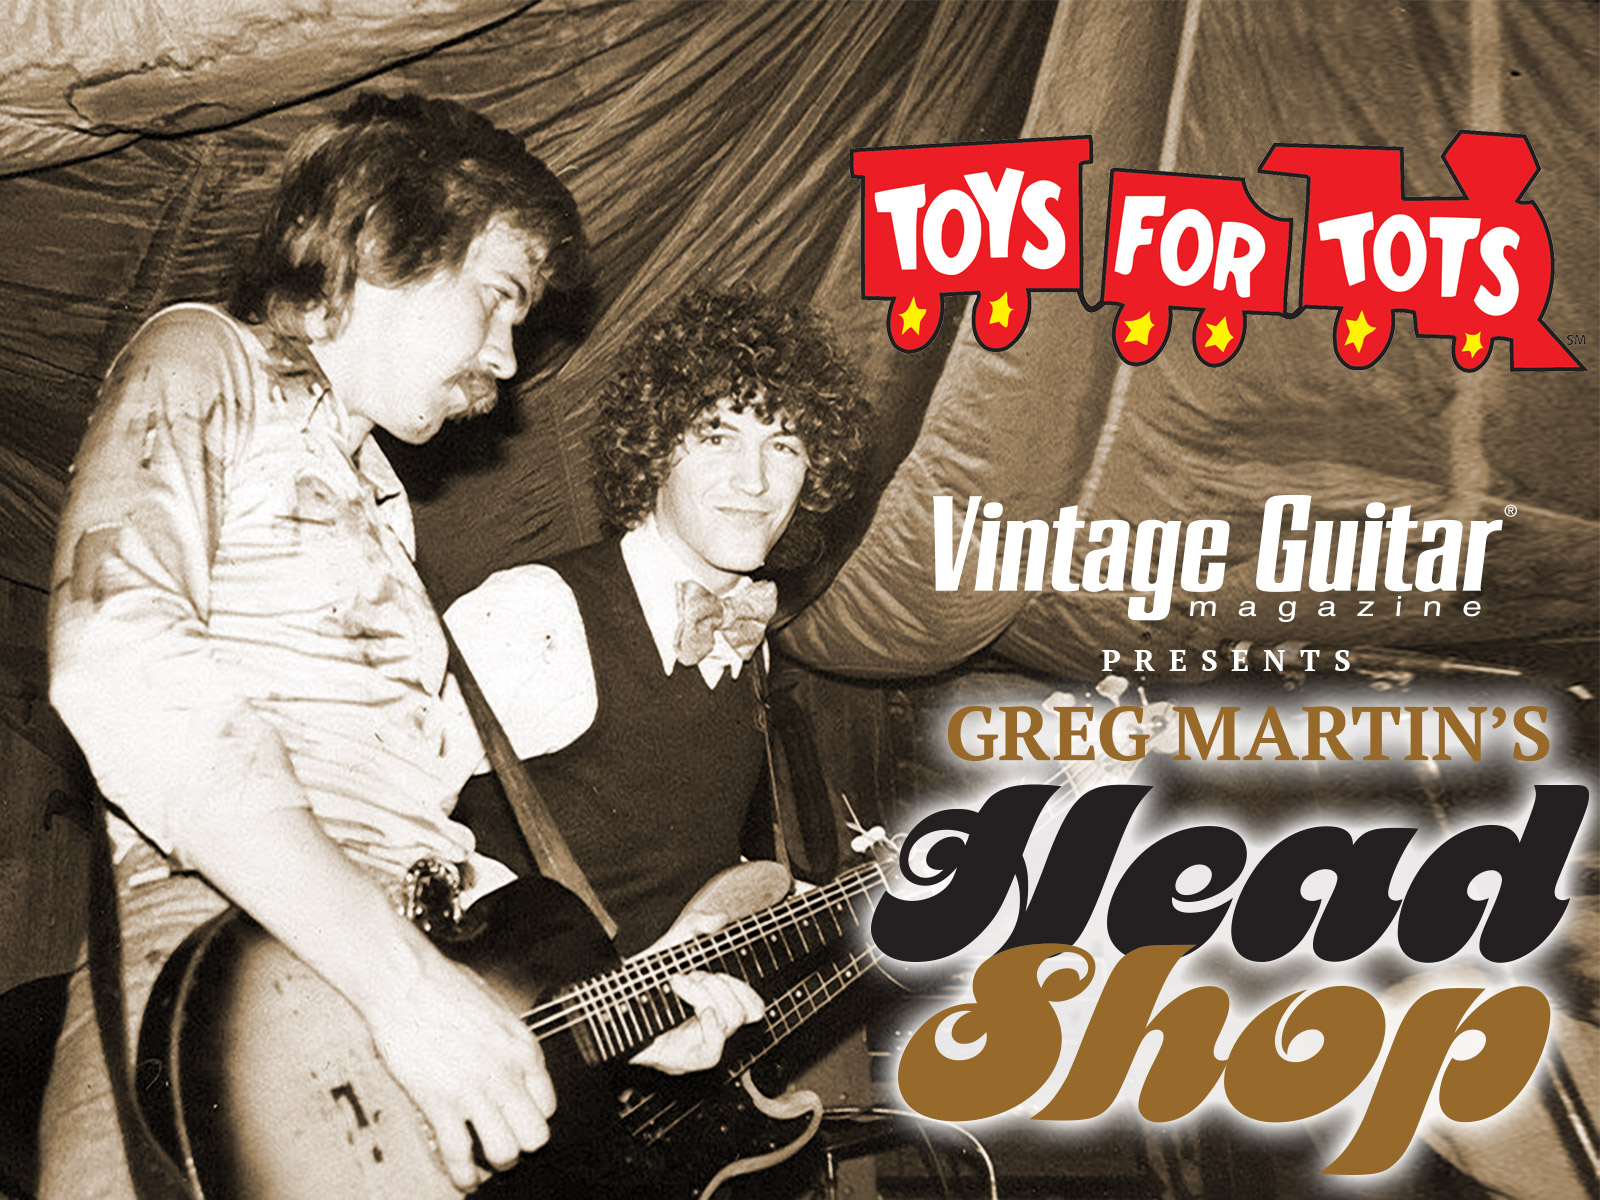 Toys For Tots and Dreams Psychedelic Realized Vintage Guitar magazine Presents Greg Martin's Head Shop